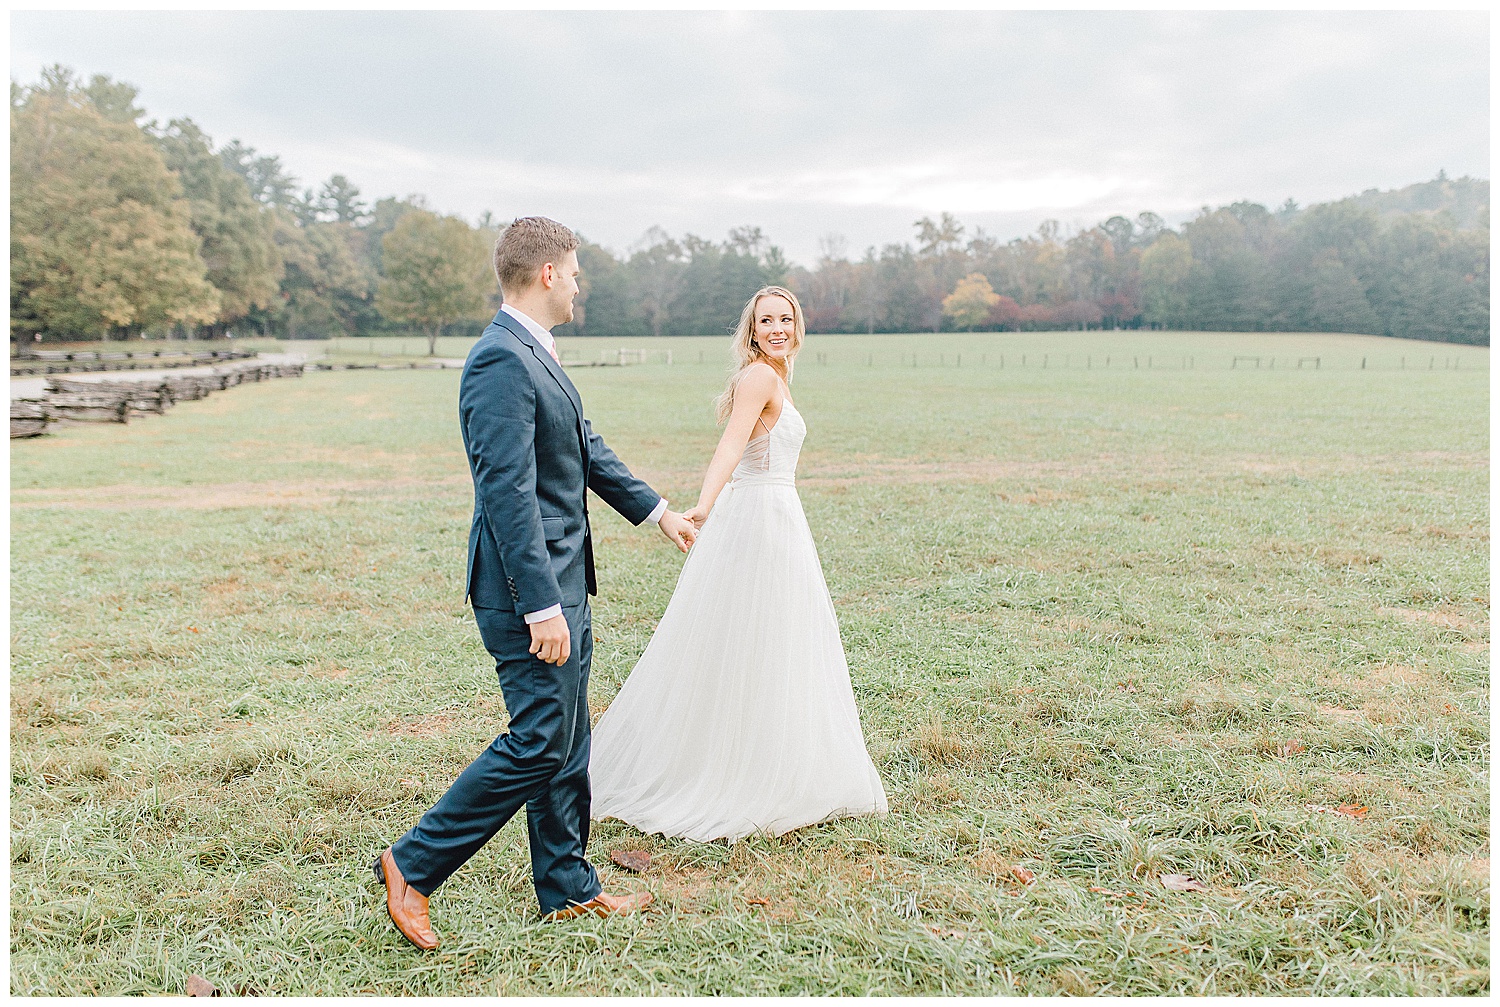 Emma Rose Company recently got to travel all the way to Nashville to photograph the most beautiful post-wedding bride and groom portraits in the Great Smoky Mountains with a gorgeous couple! Nashville wedding inspiration at it's finest._0028.jpg